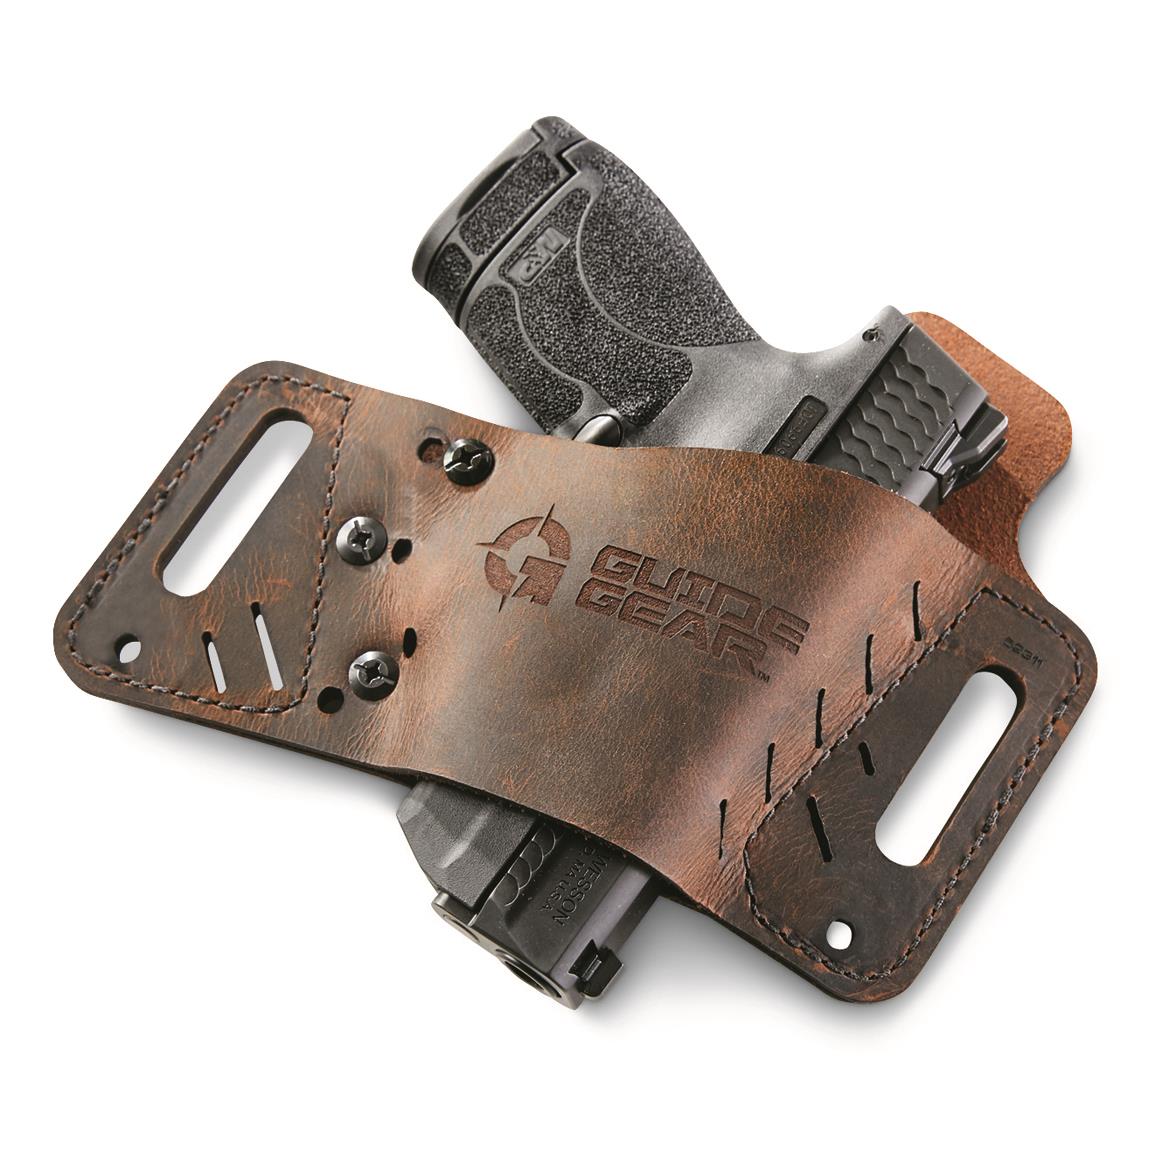 Guide Gear Protector S3 IWB/OWB Holster